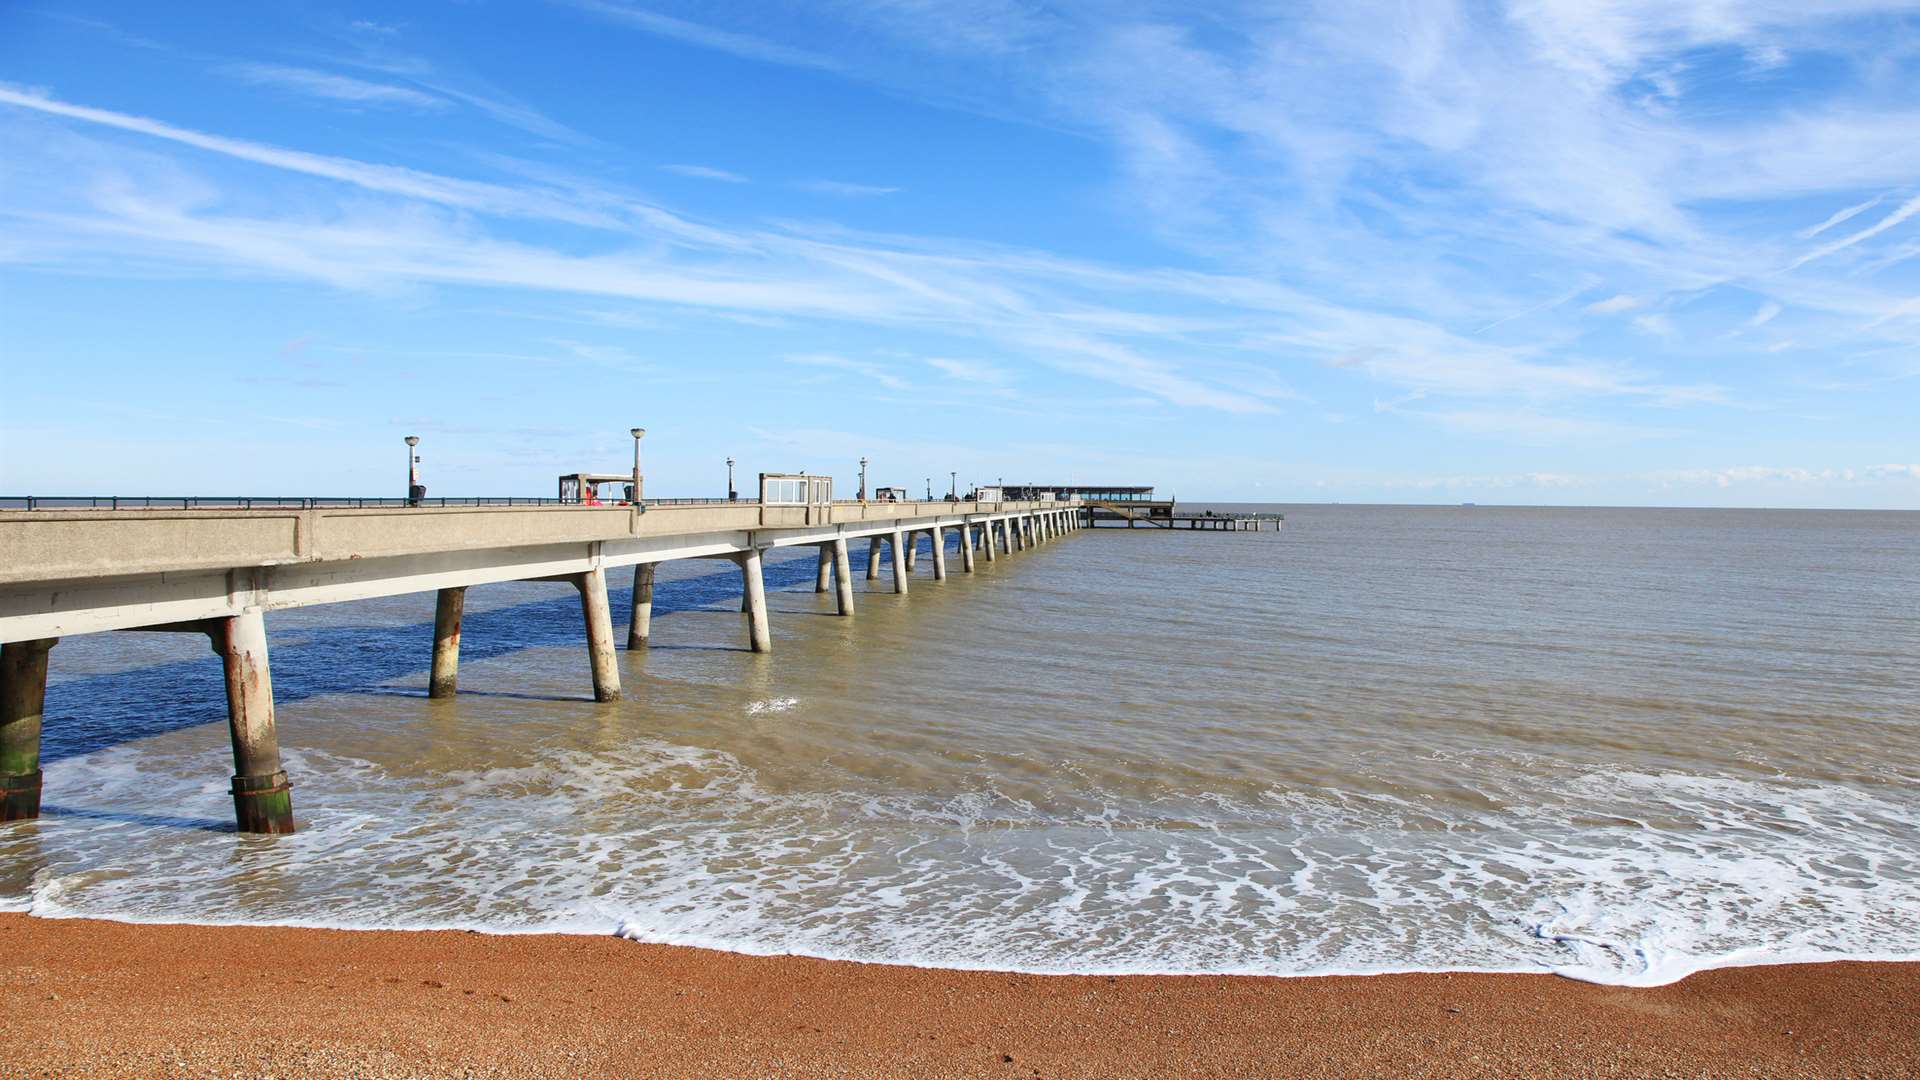 Deal's pier is the last remaining fully intact leisure pier in Kent and is Grade II listed